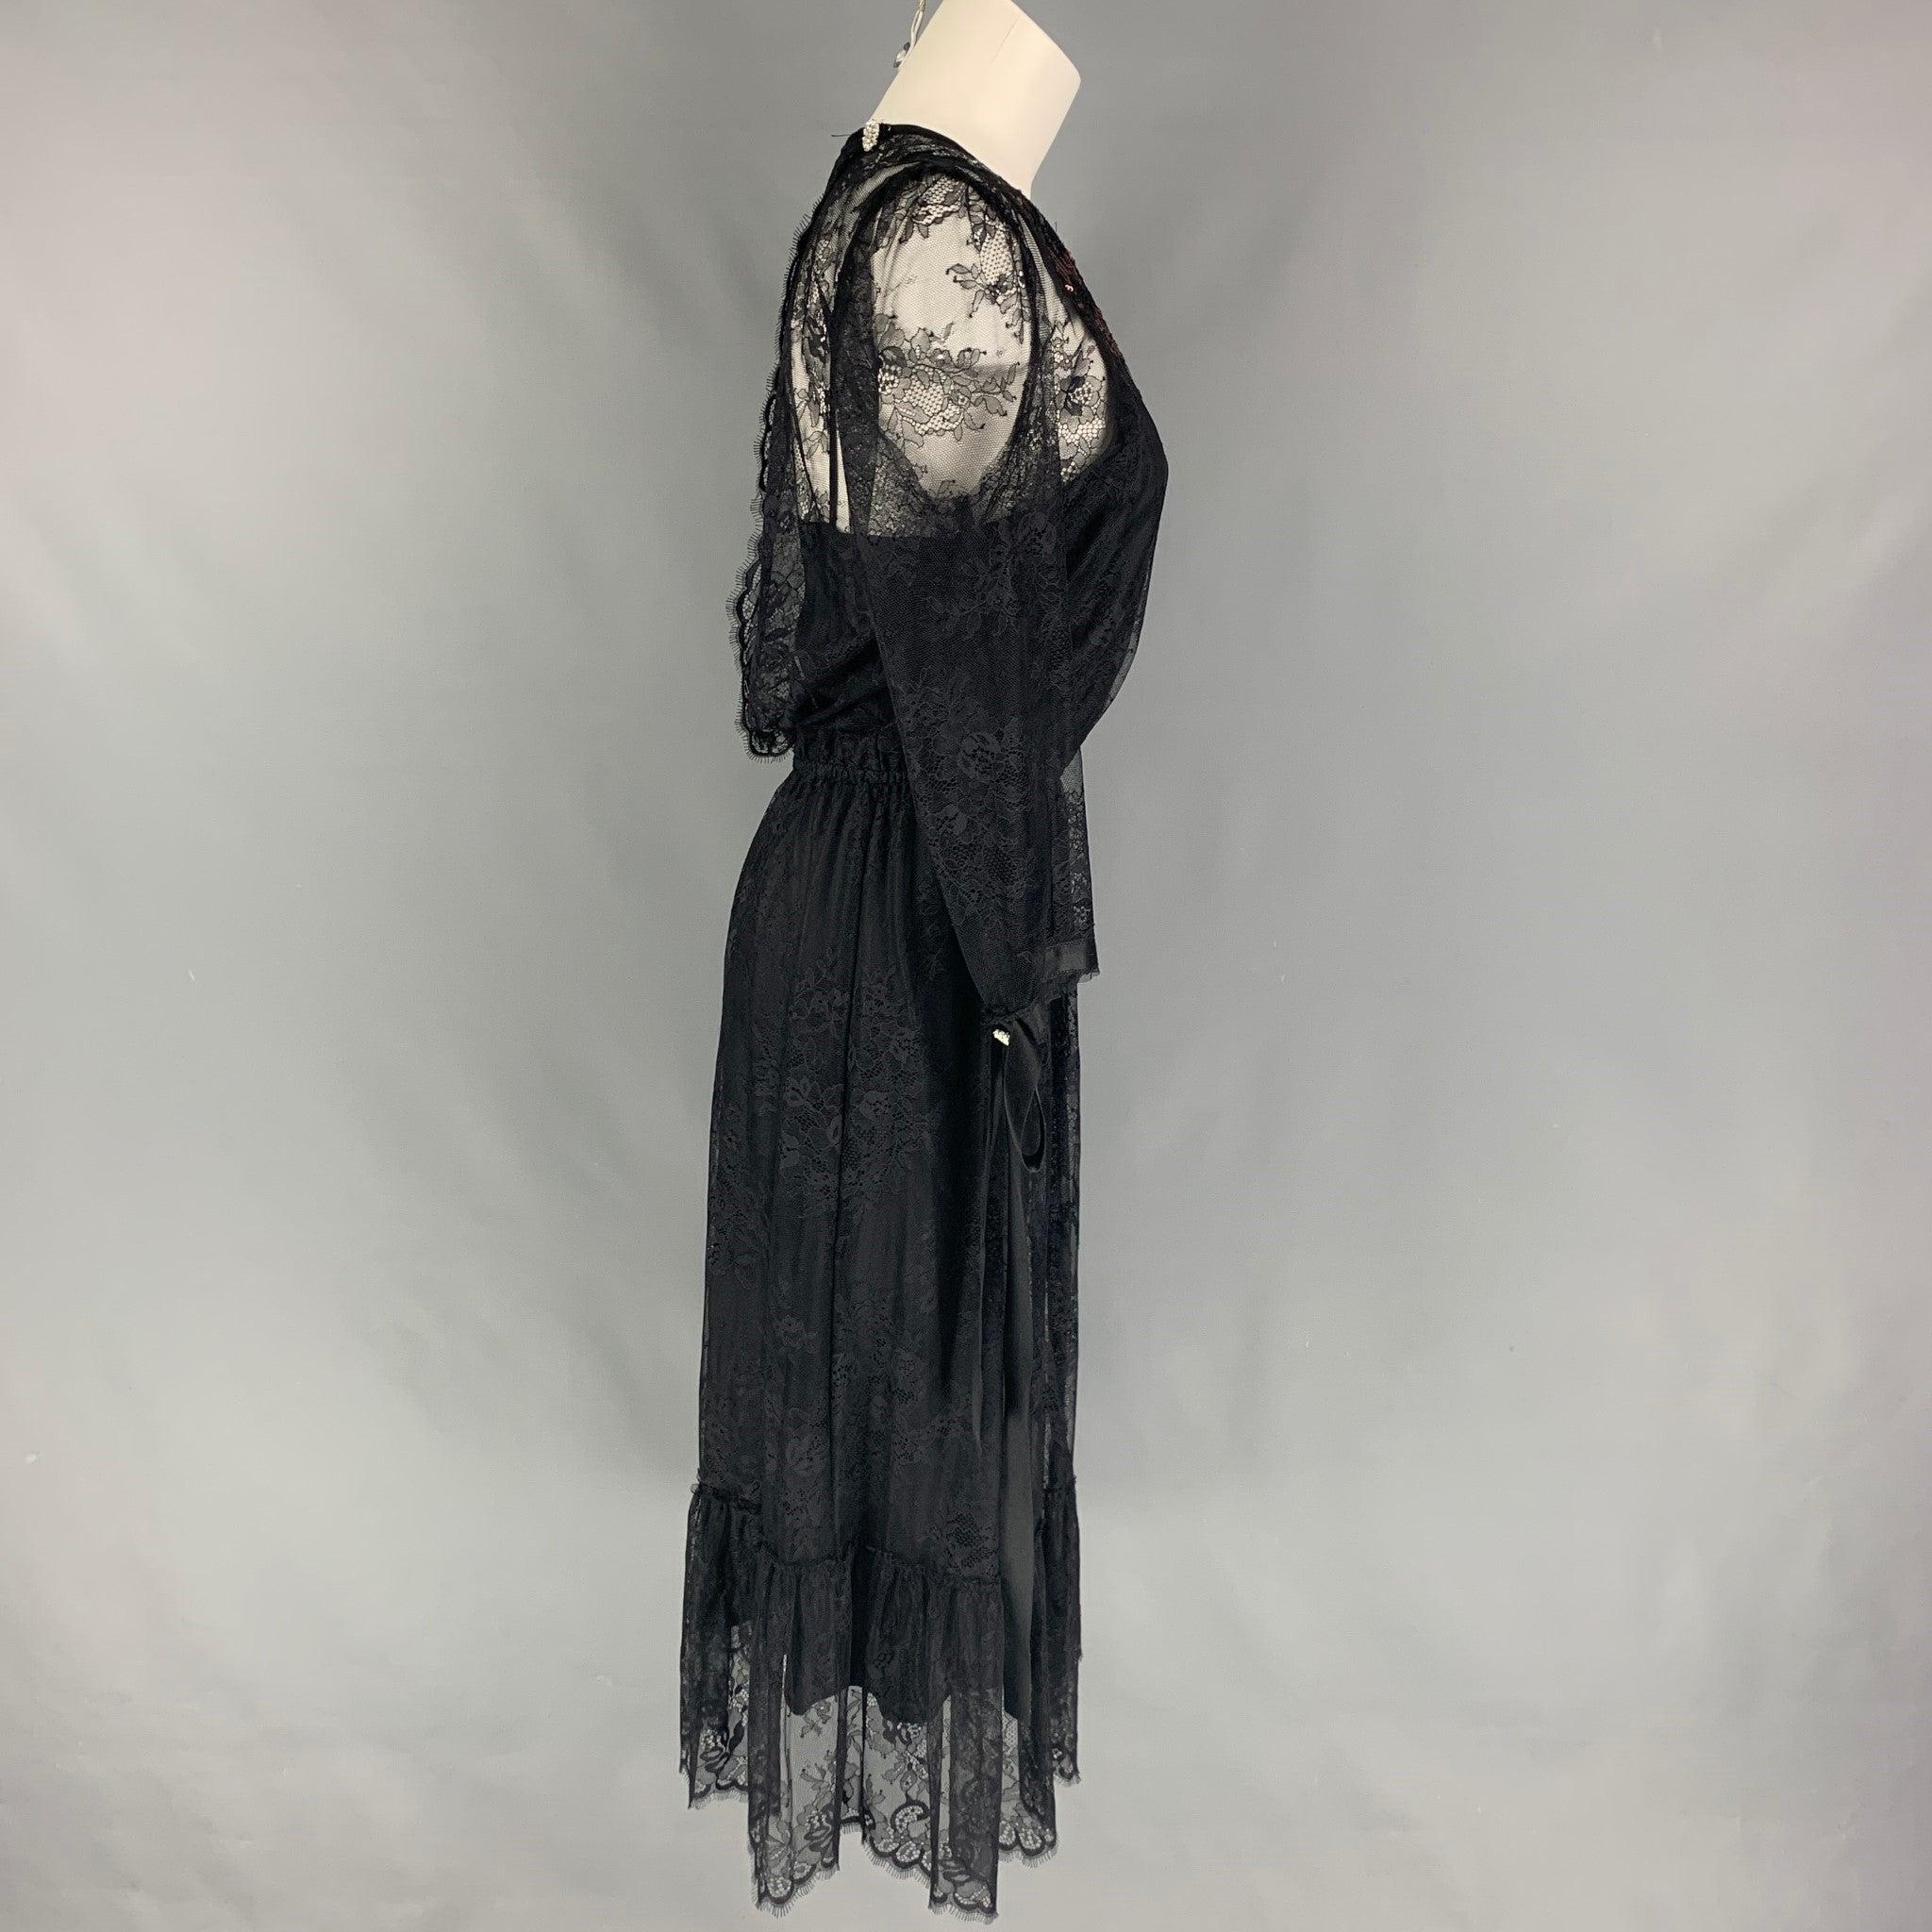 MARC JACOBS dress comes in a black lace nylon with a slip liner, ribbon sleeve details, floral sequin design, back rhinestone detail, and a elastic waistband.
Very Good
Pre-Owned Condition. 

Marked:   4 

Measurements: 
 
Shoulder: 14 inches  Bust: